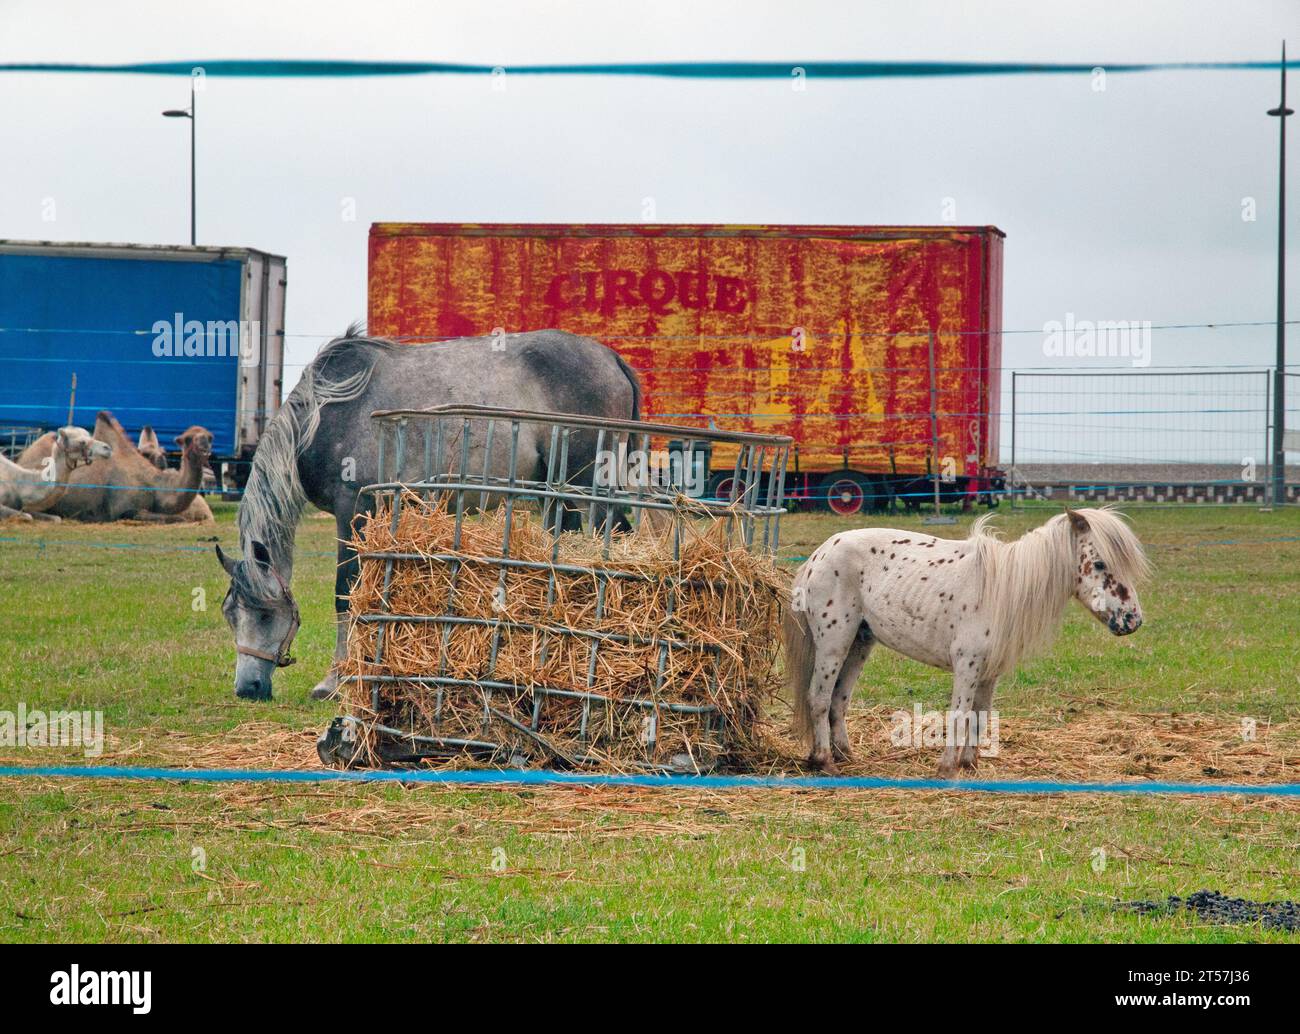 A circus in Dieppe, France Stock Photo